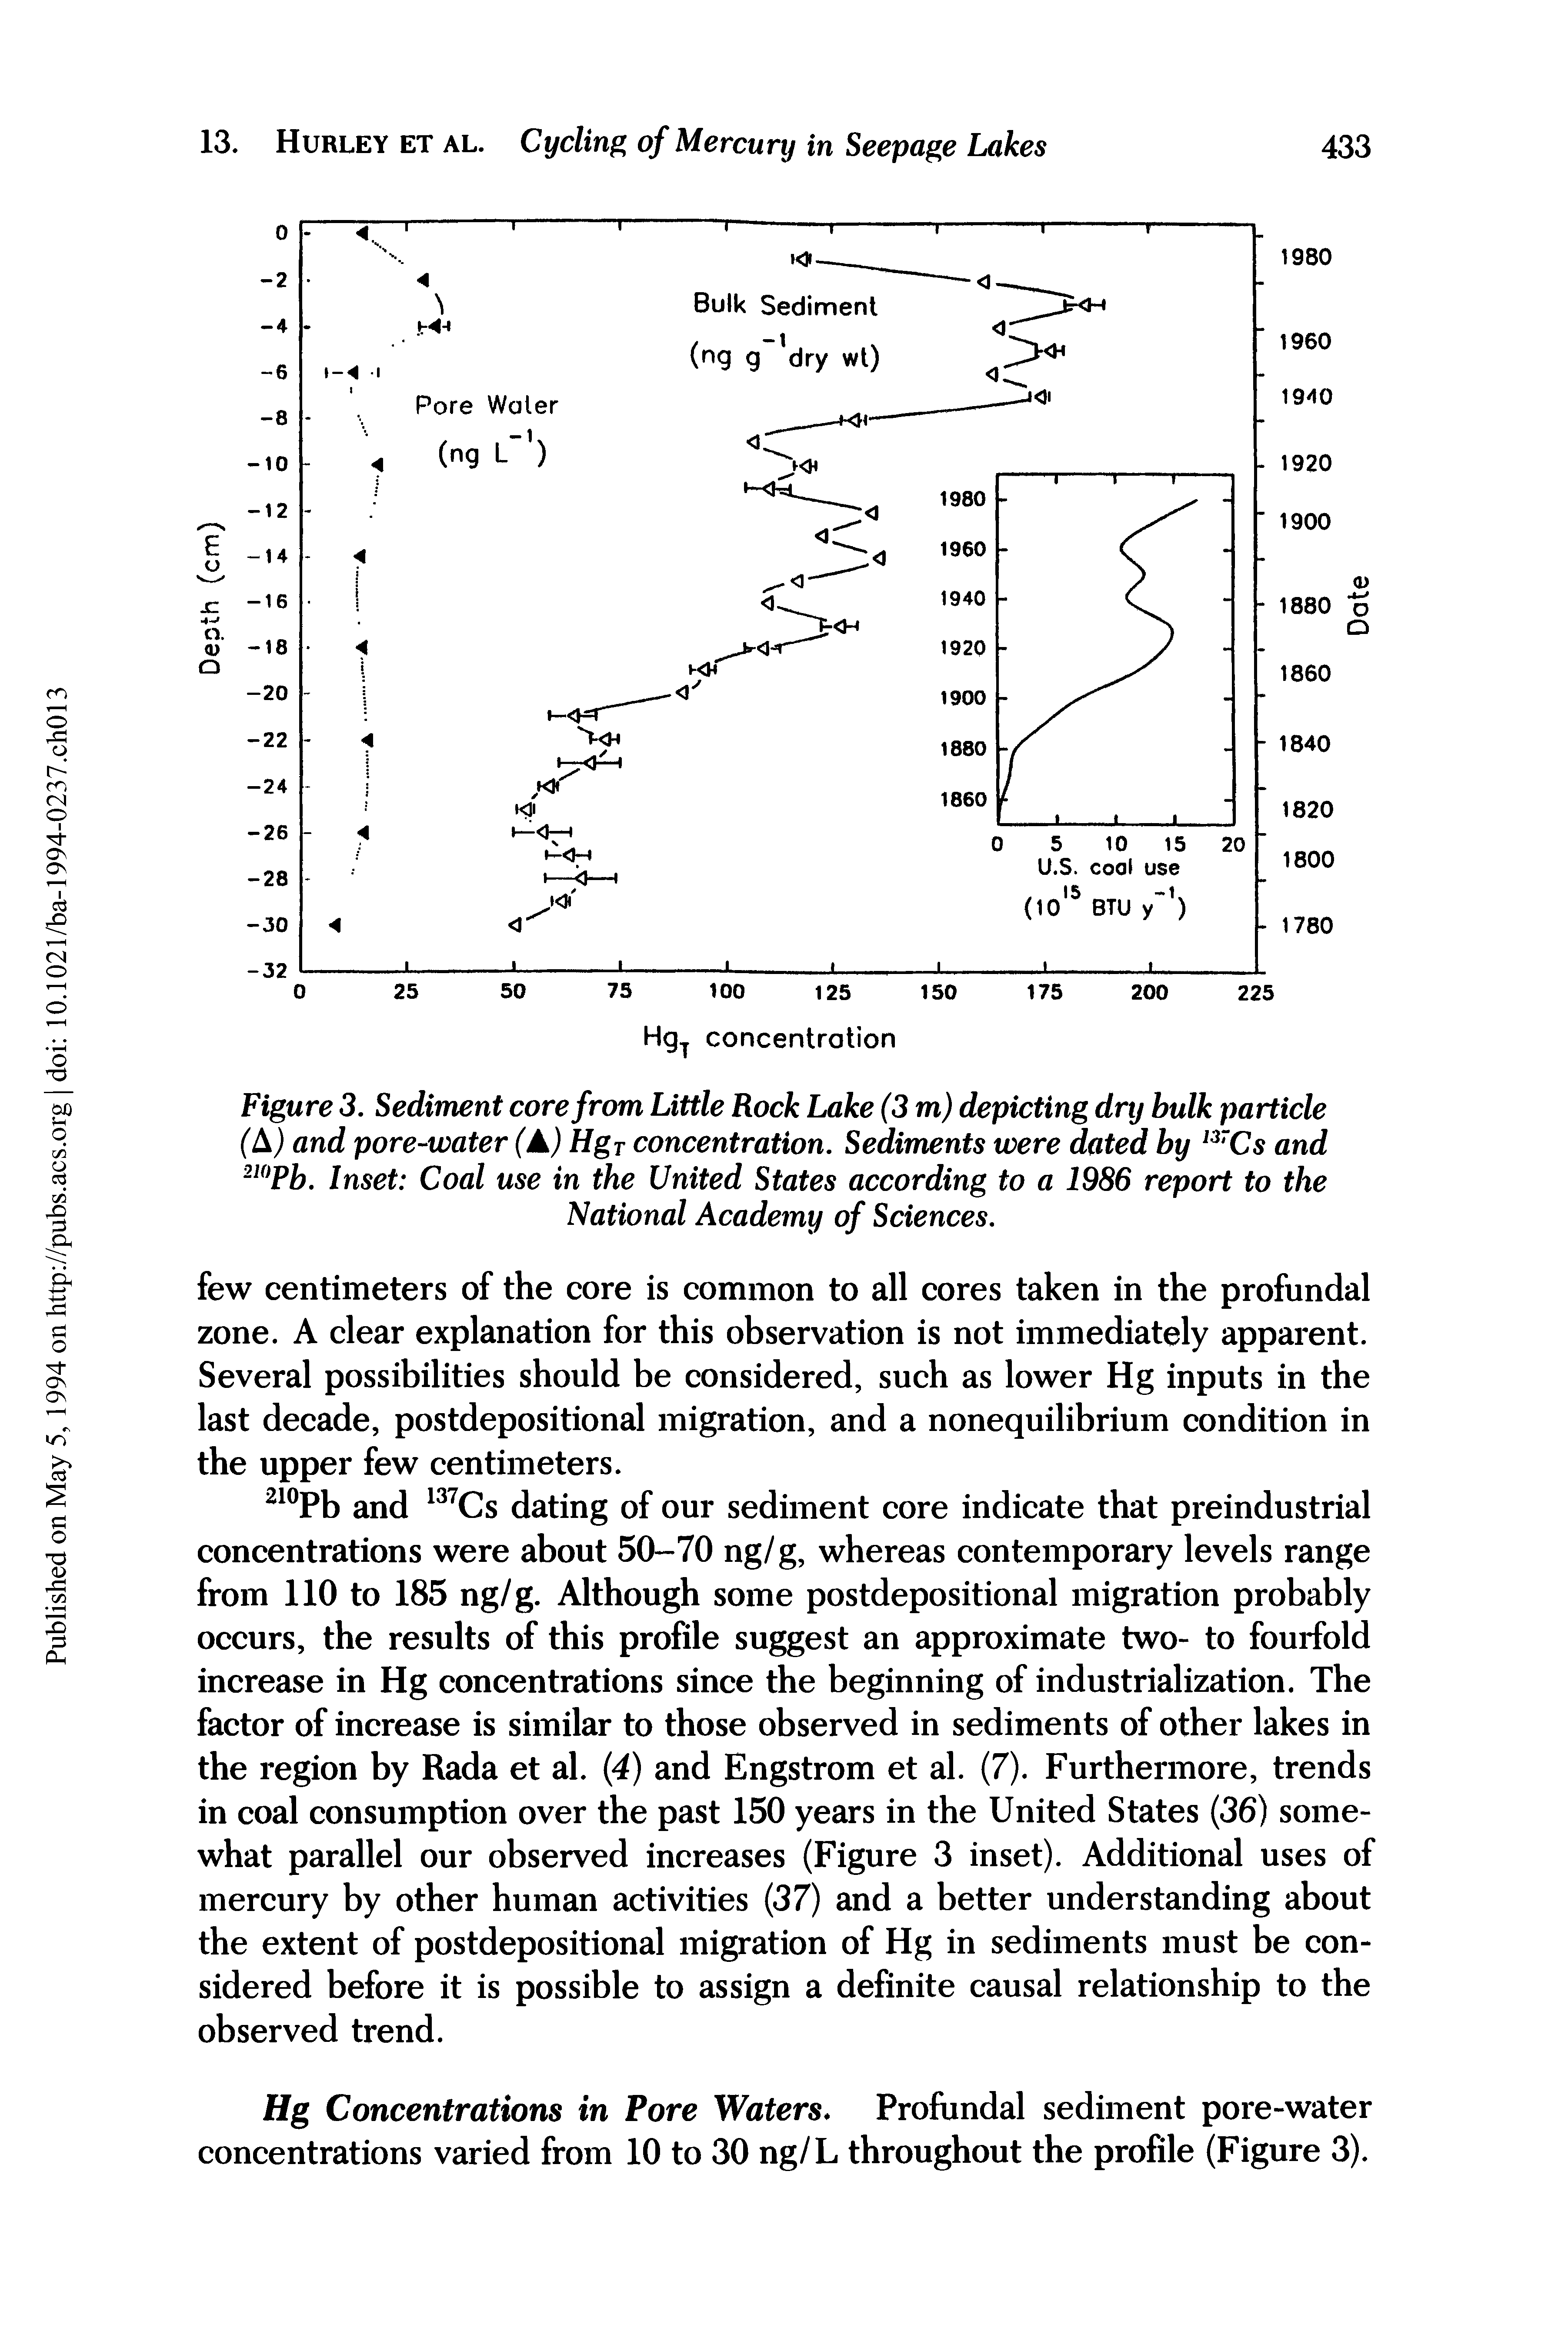 Figure 3. Sediment core from Little Rock Lake (3 m) depicting dry bulk particle (A) and pore-water (A) HgT concentration. Sediments were dated by 13rCs and 210Pb. Inset Coal use in the United States according to a 1986 report to the National Academy of Sciences.